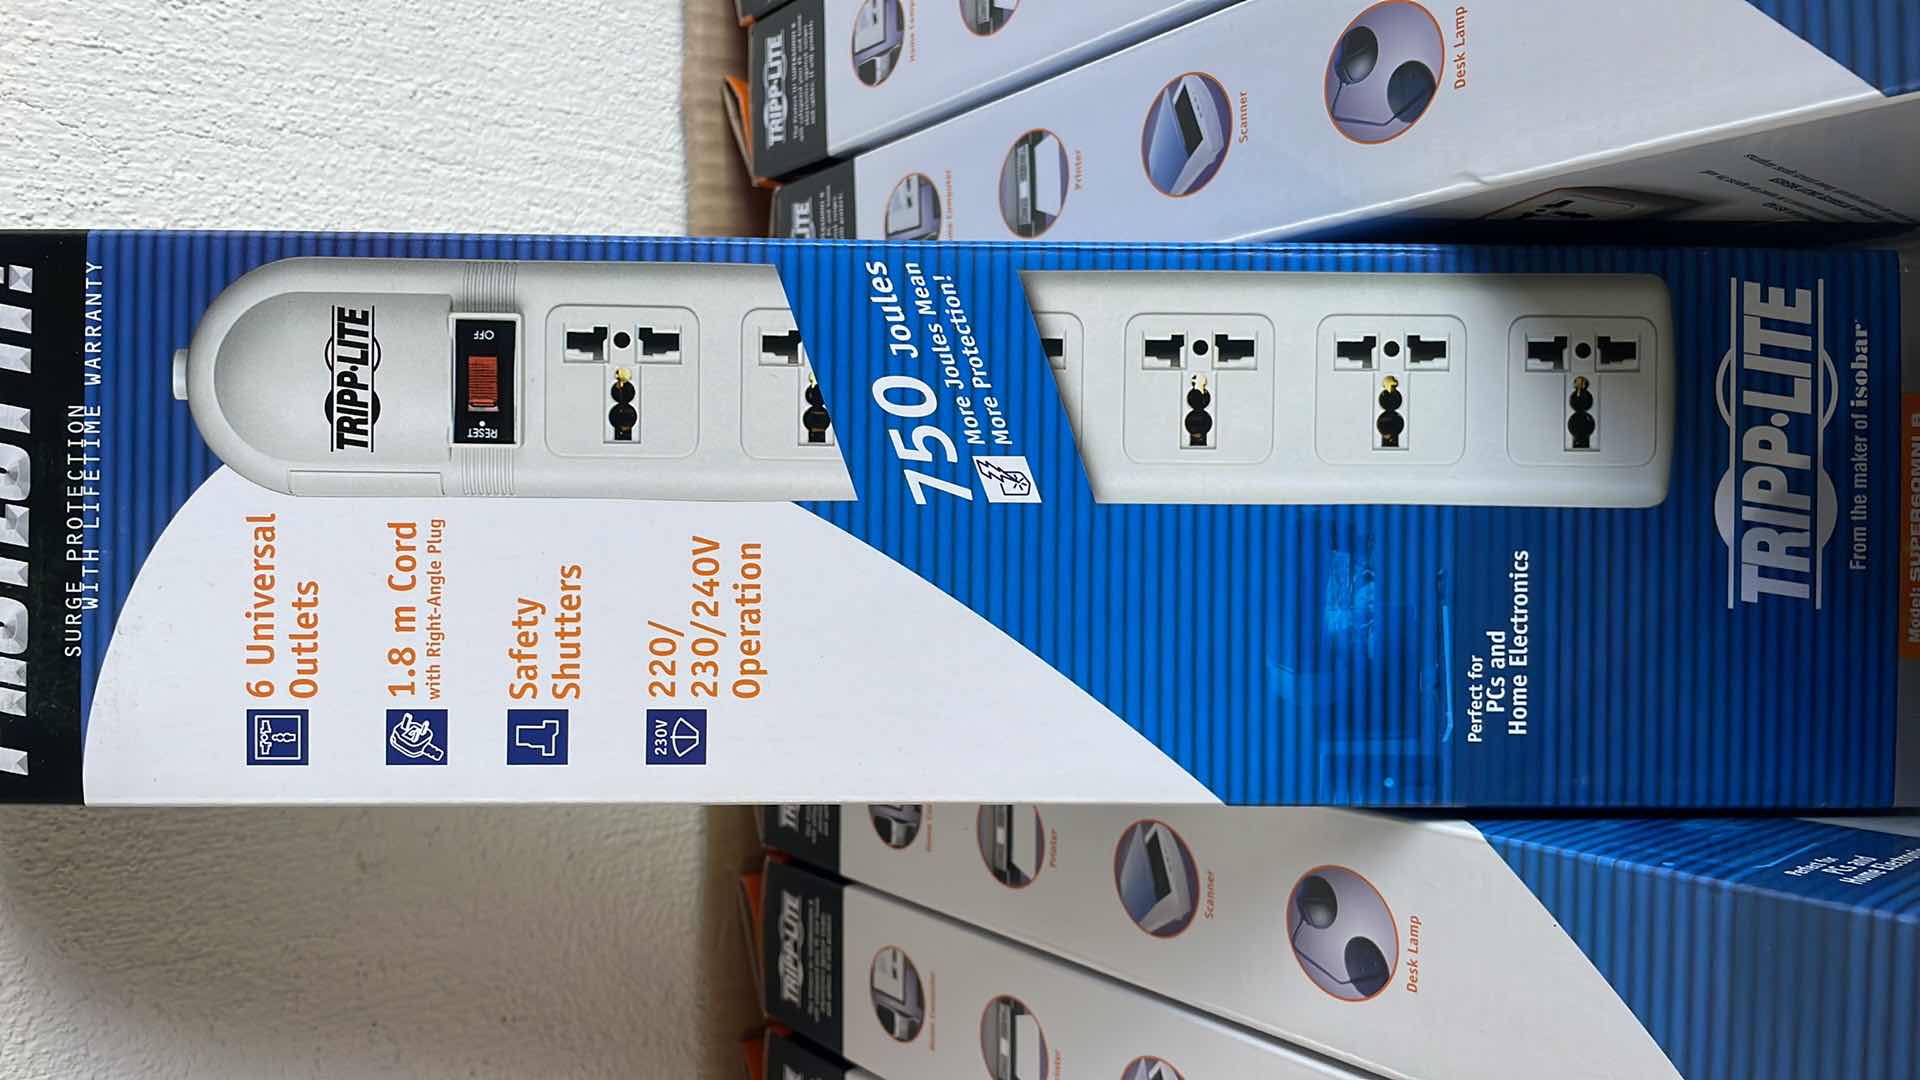 Photo 3 of TRIPP LITE 230V 6-UNIVERSAL OUTLET SURGE PROTECTOR POWER STRIPS (20)